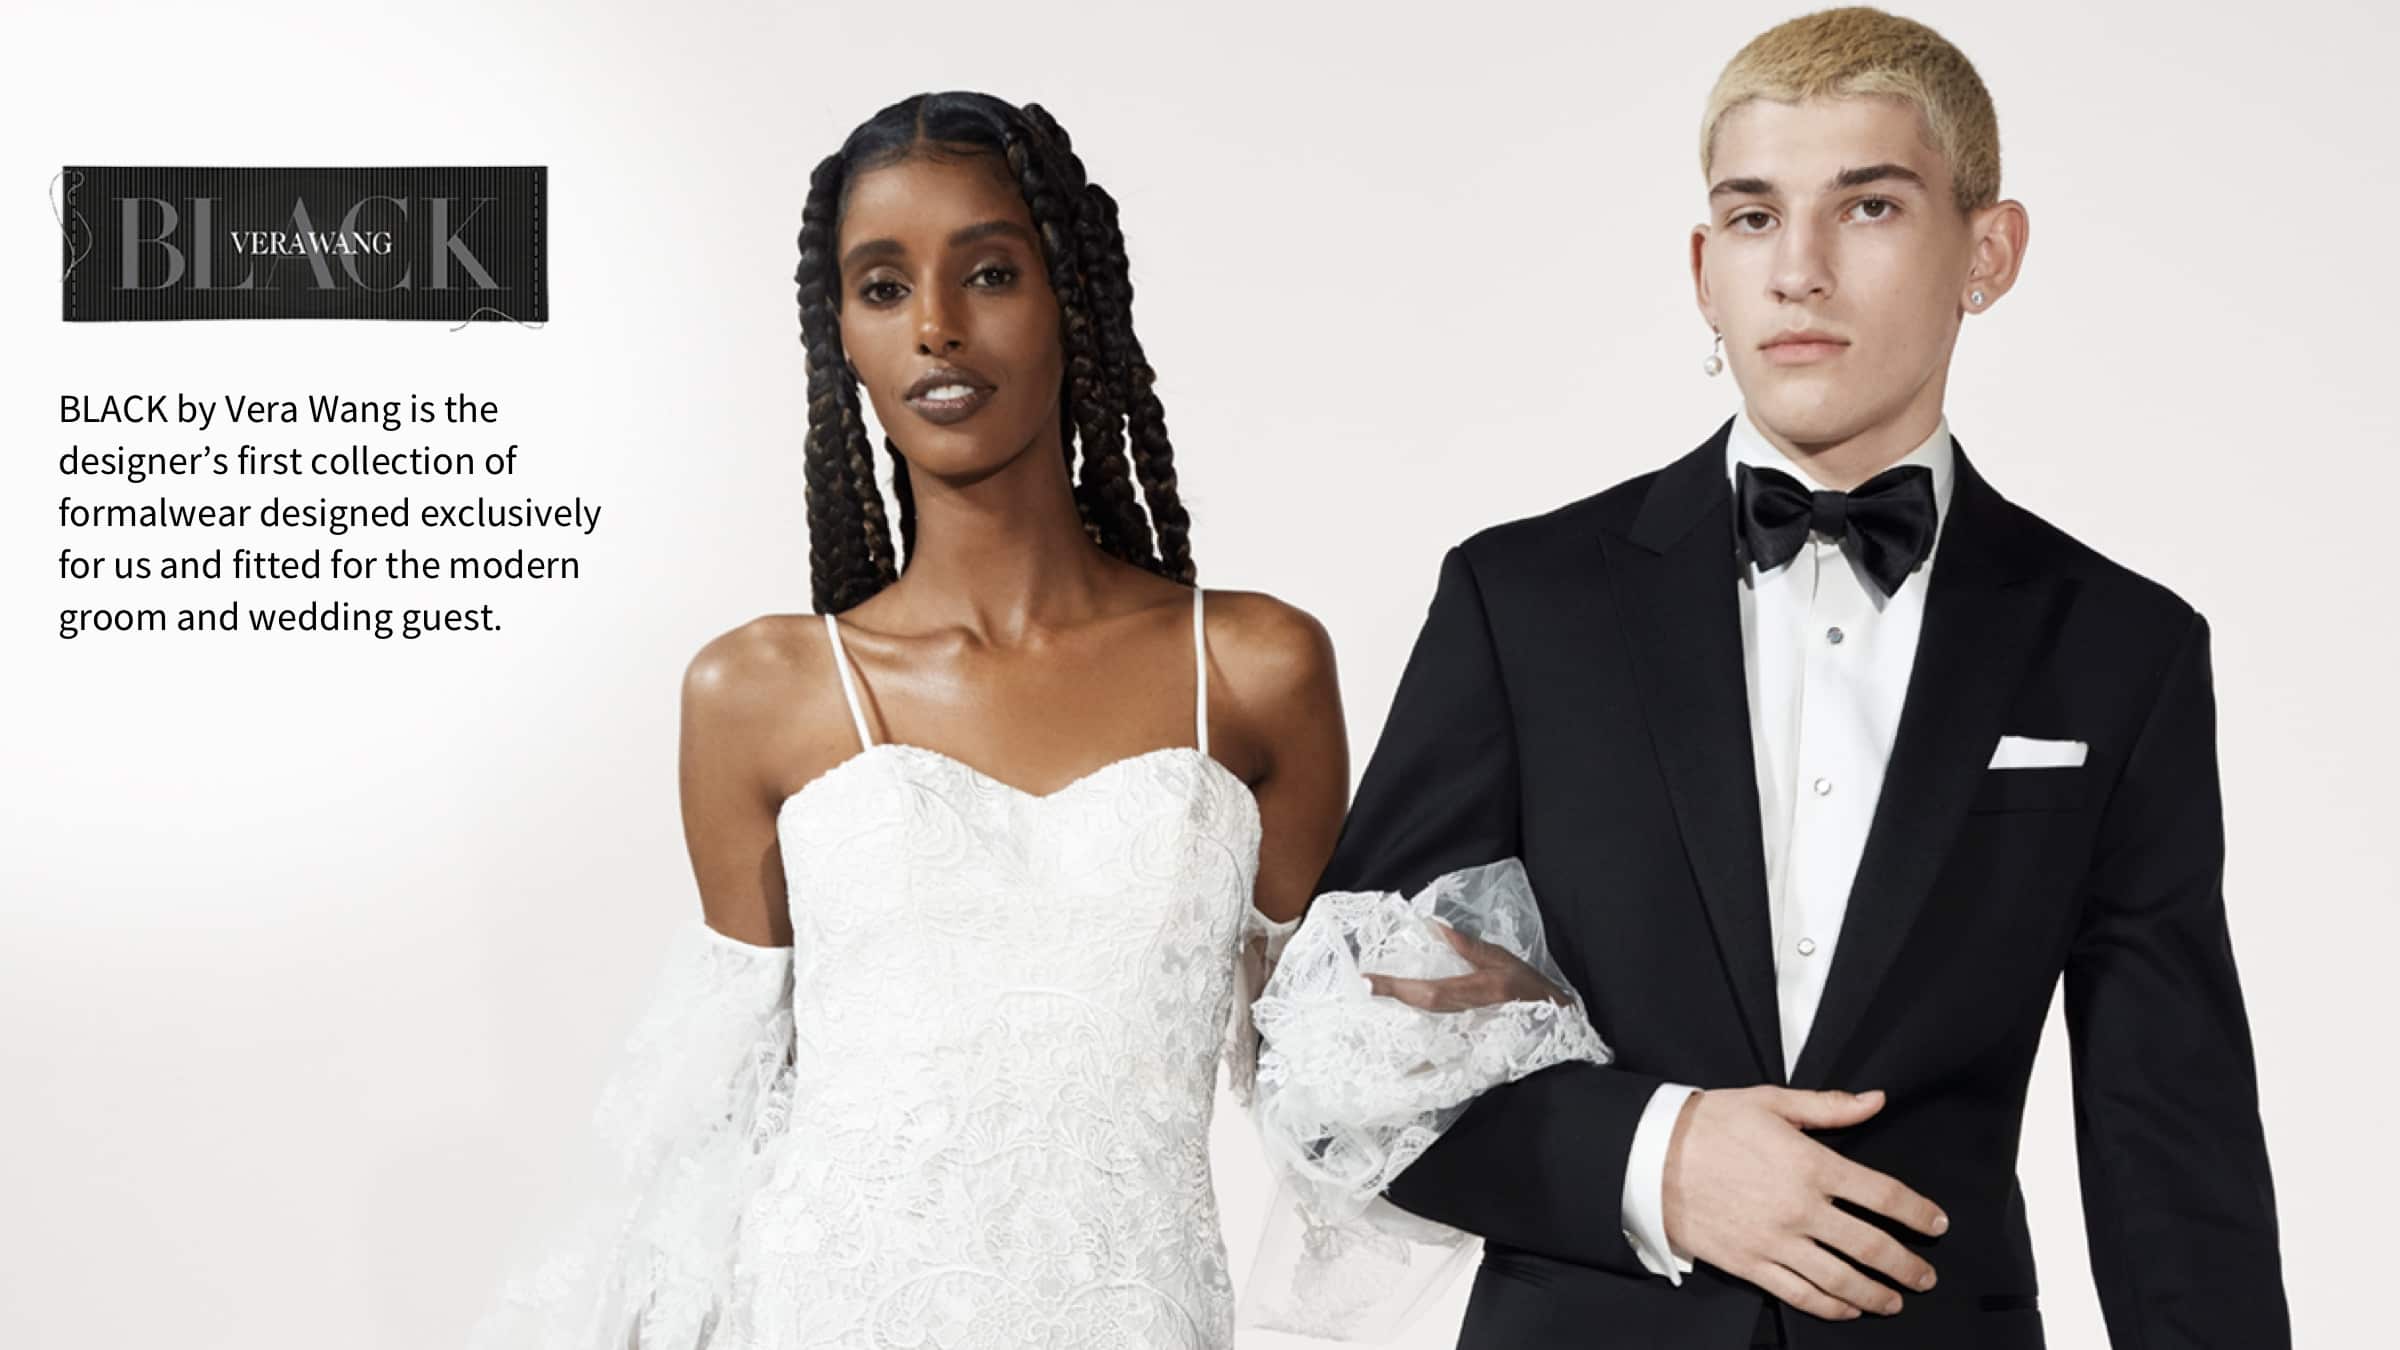 Black by Vera Wang is the designer's first collection of formalwear designed exclusively for us.